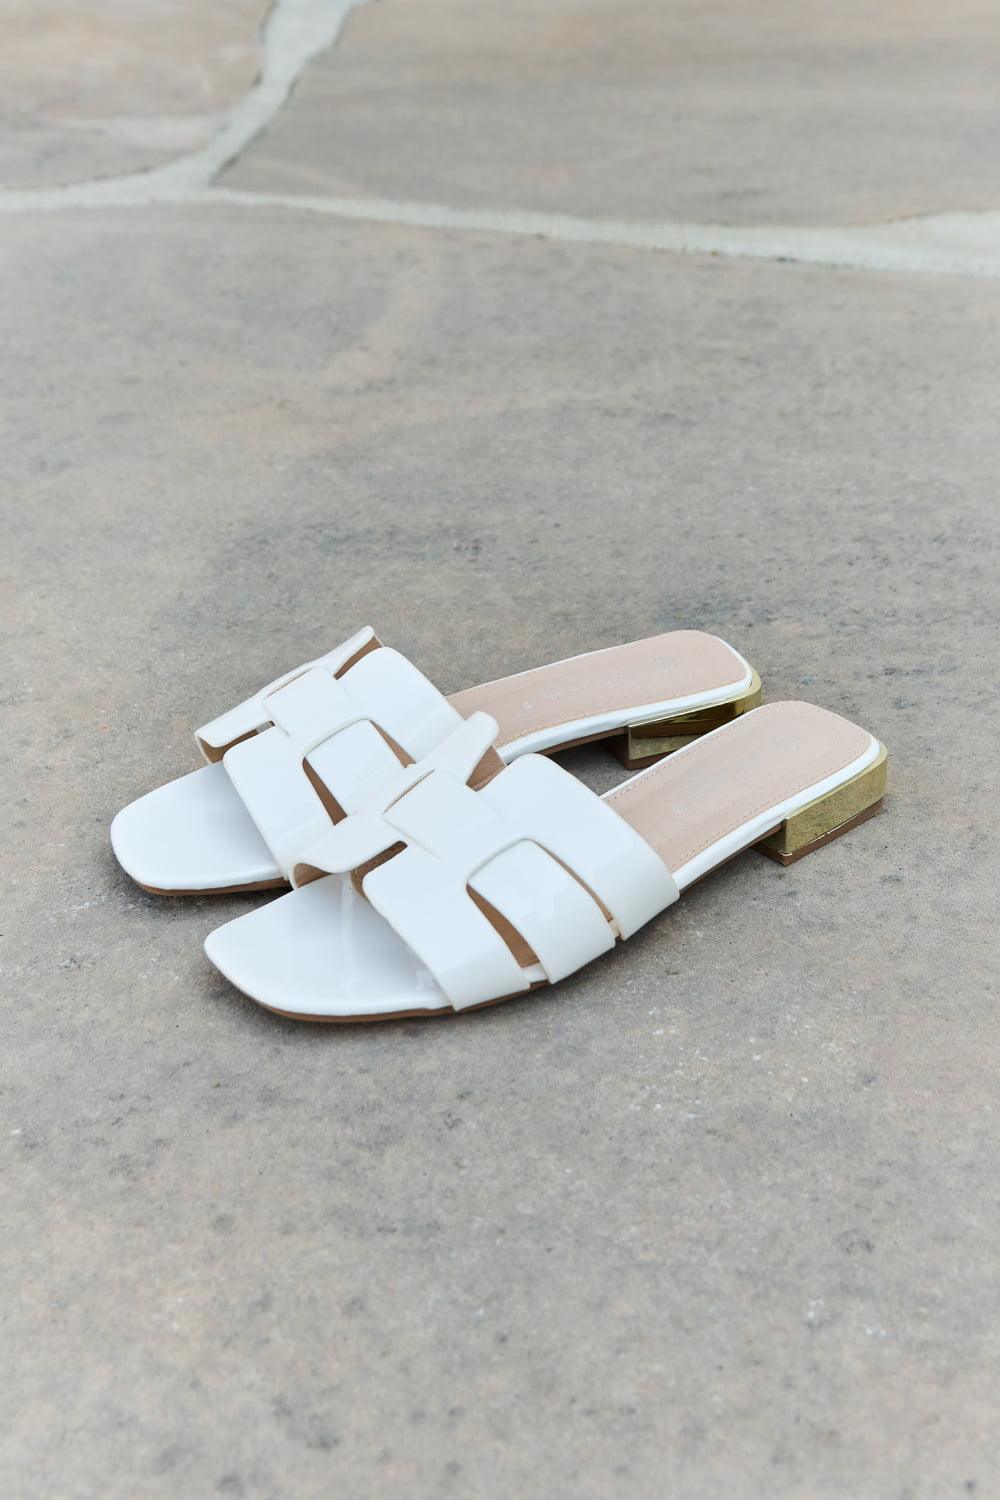 Weeboo Walk It Out Slide Sandals in Icy White - CADEAUME